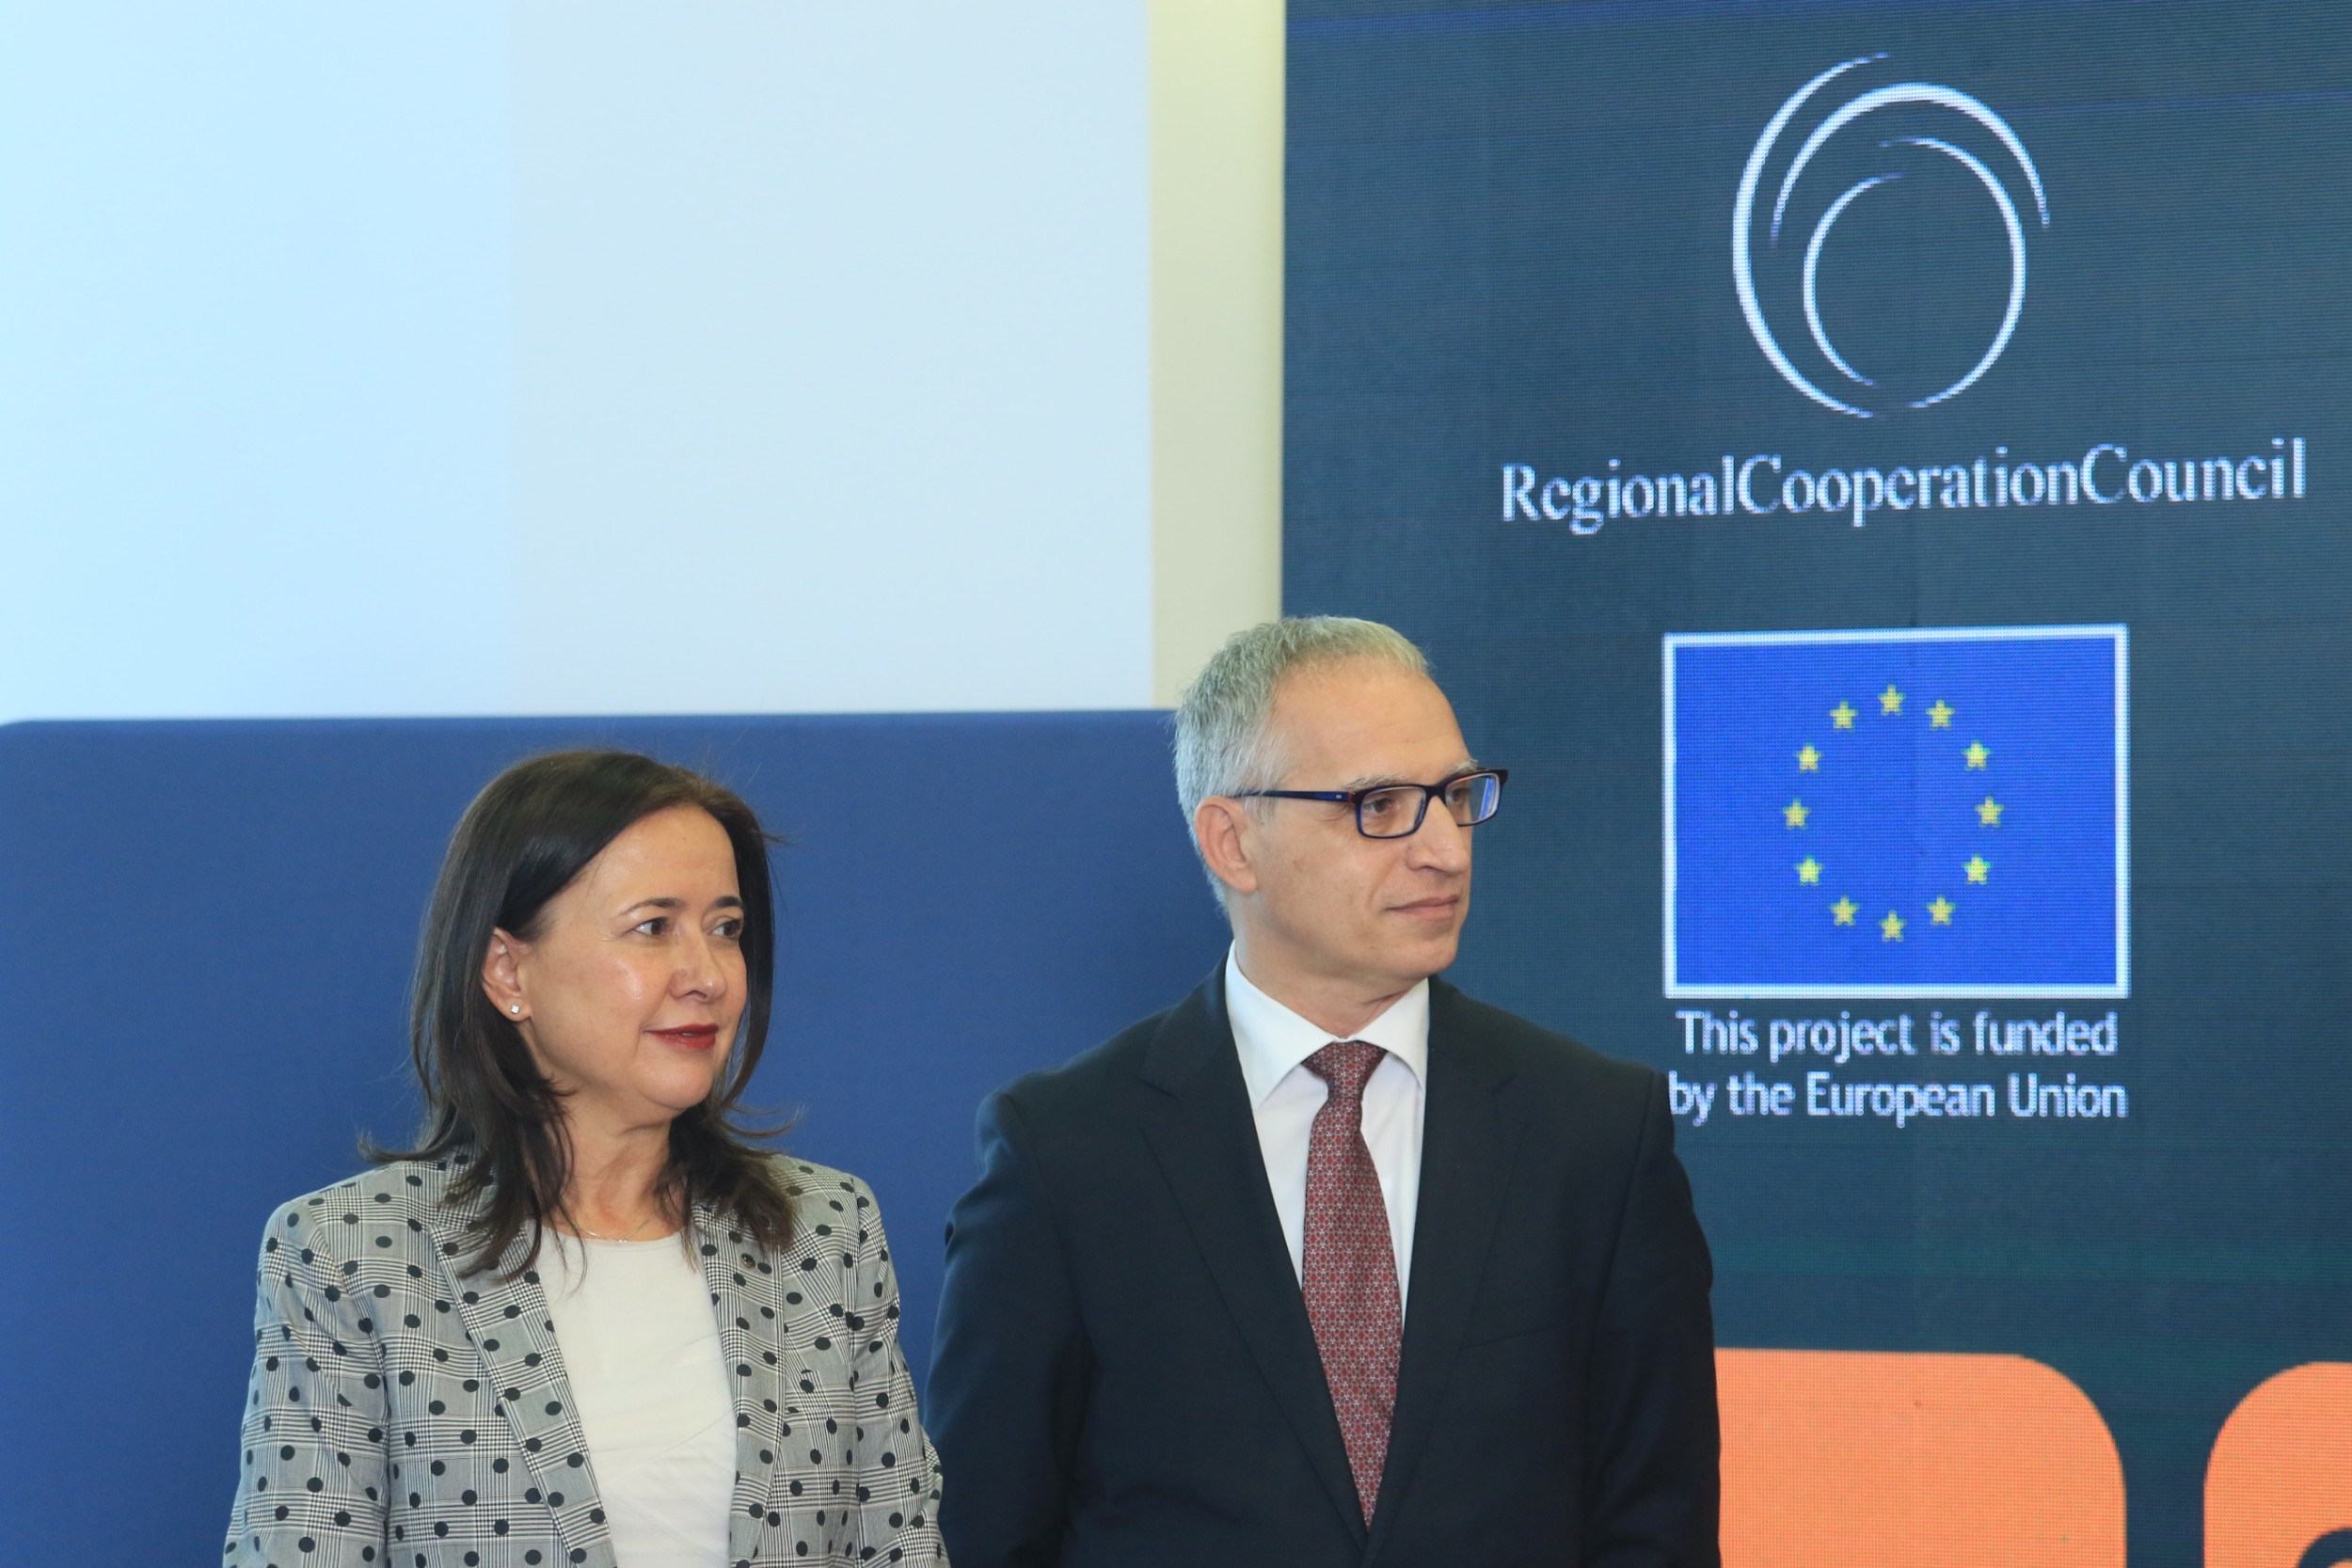 Genoveva Ruiz Calavera, Director for the Western Balkans at the European Commission’s Directorate-General for European Neighbourhood Policy and Enlargement Negotiations and Goran Svilanovic, Secretary General of the Regional Cooperation Council at the First Grant Award Ceremony of the Tourism Development and Promotion Project, in Sarajevo on 9 November 2018 (Photo: RCC/Armin Durgut)